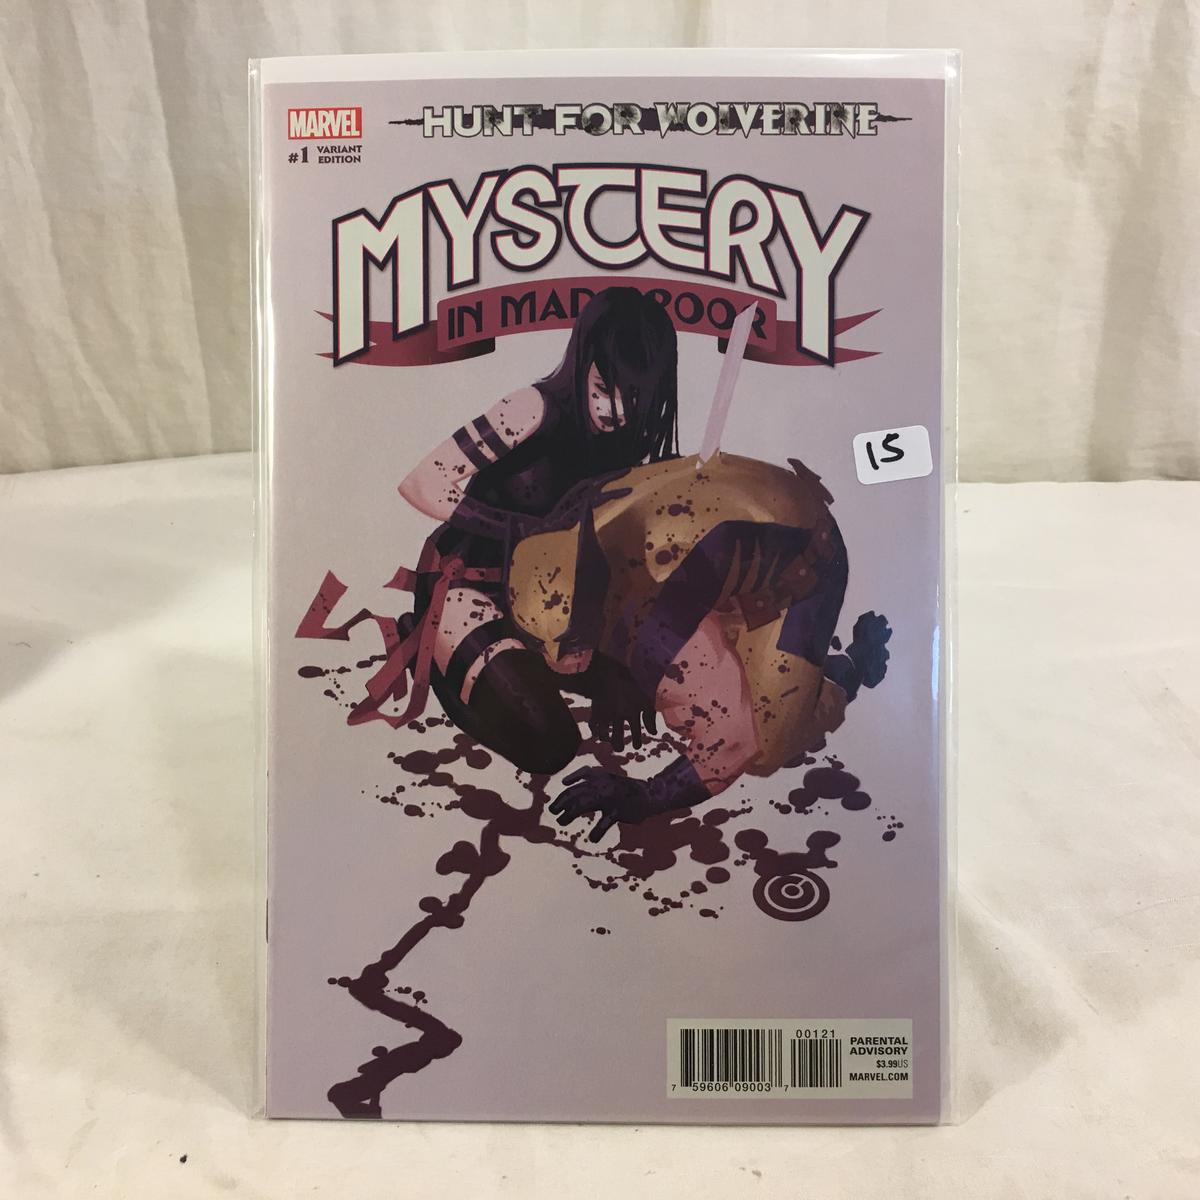 Collector Marvel Comic Book Variant Edition Hunt For Wolverine #1 Mystery in Madripoor